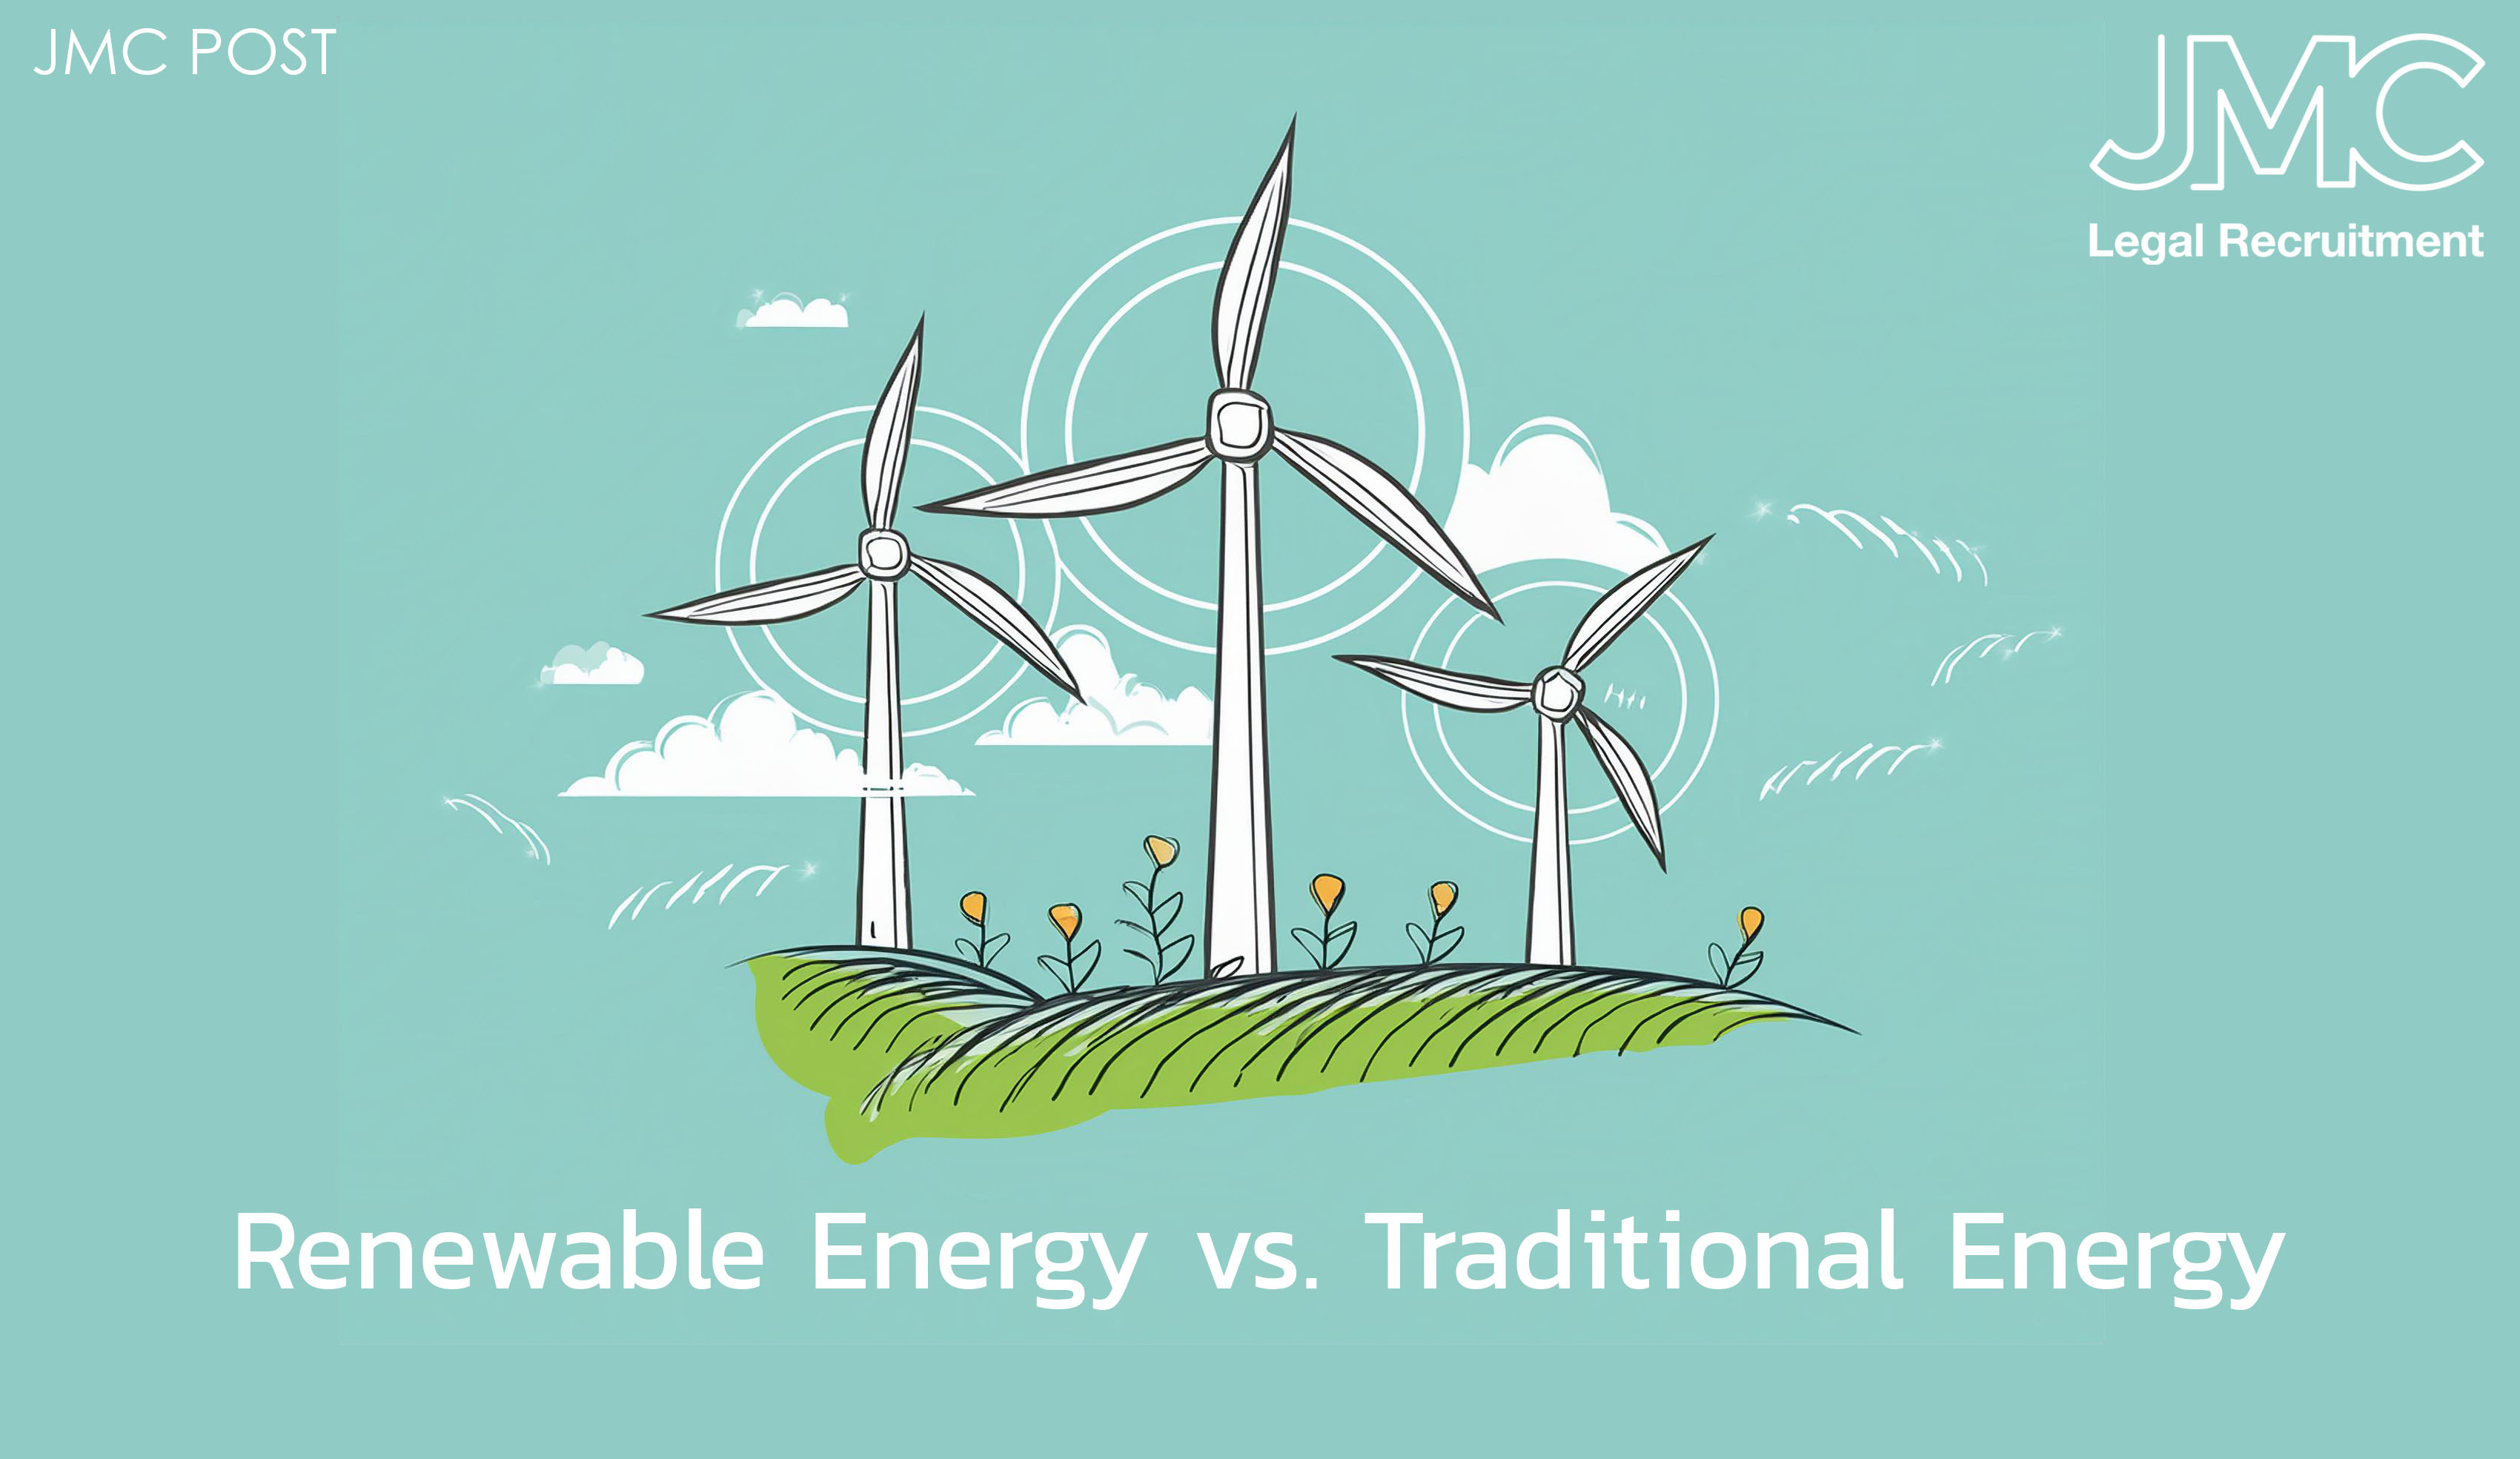 Renewable Energy Vs Traditional Energy: Challenges for In-House Legal Counsel